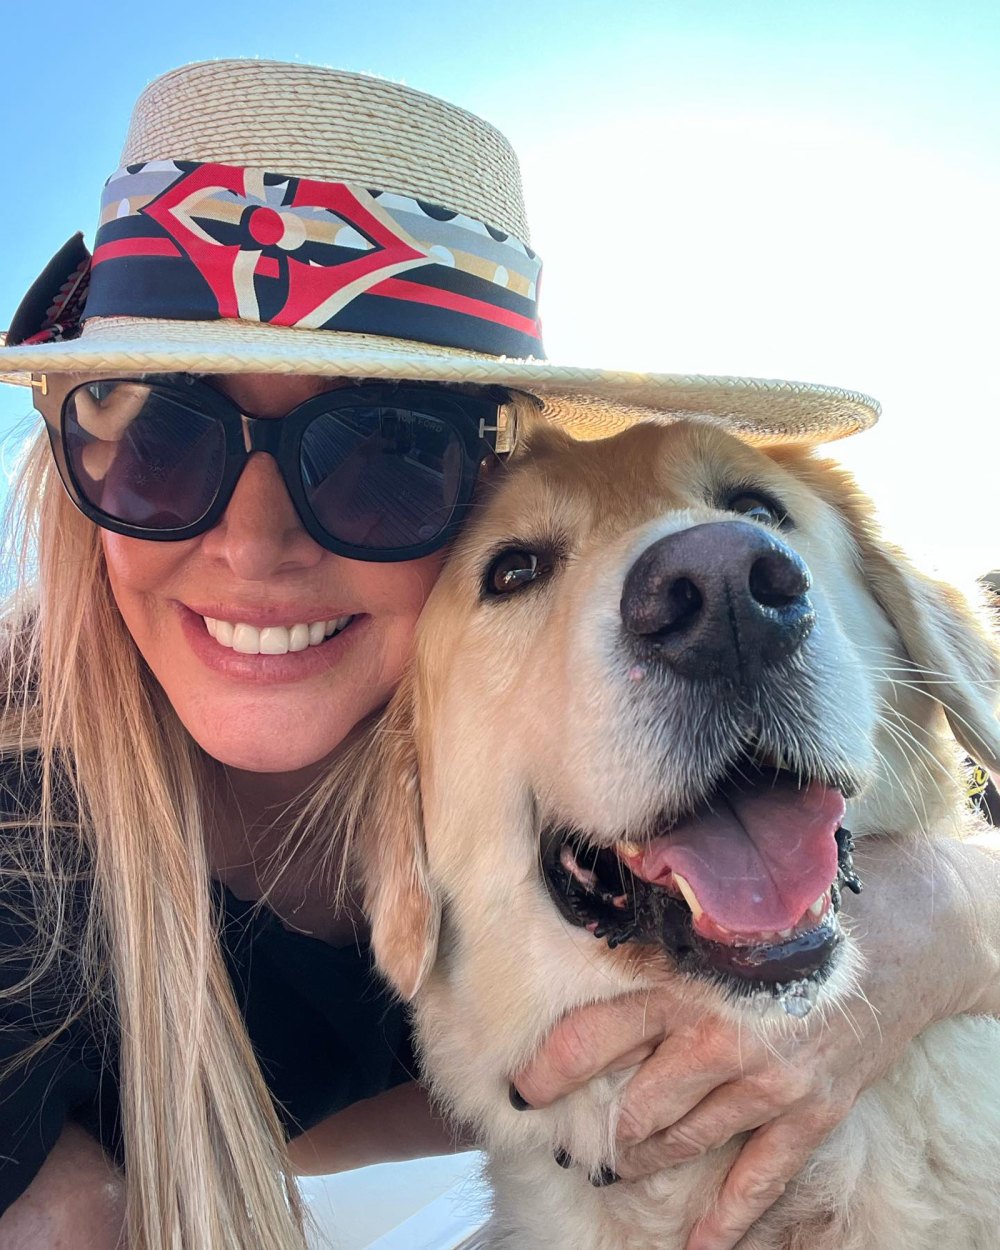 RHOC's Shannon Beador Says Dog Archie 'Will Be OK' After Being Attacked and Bitten by Another Dog